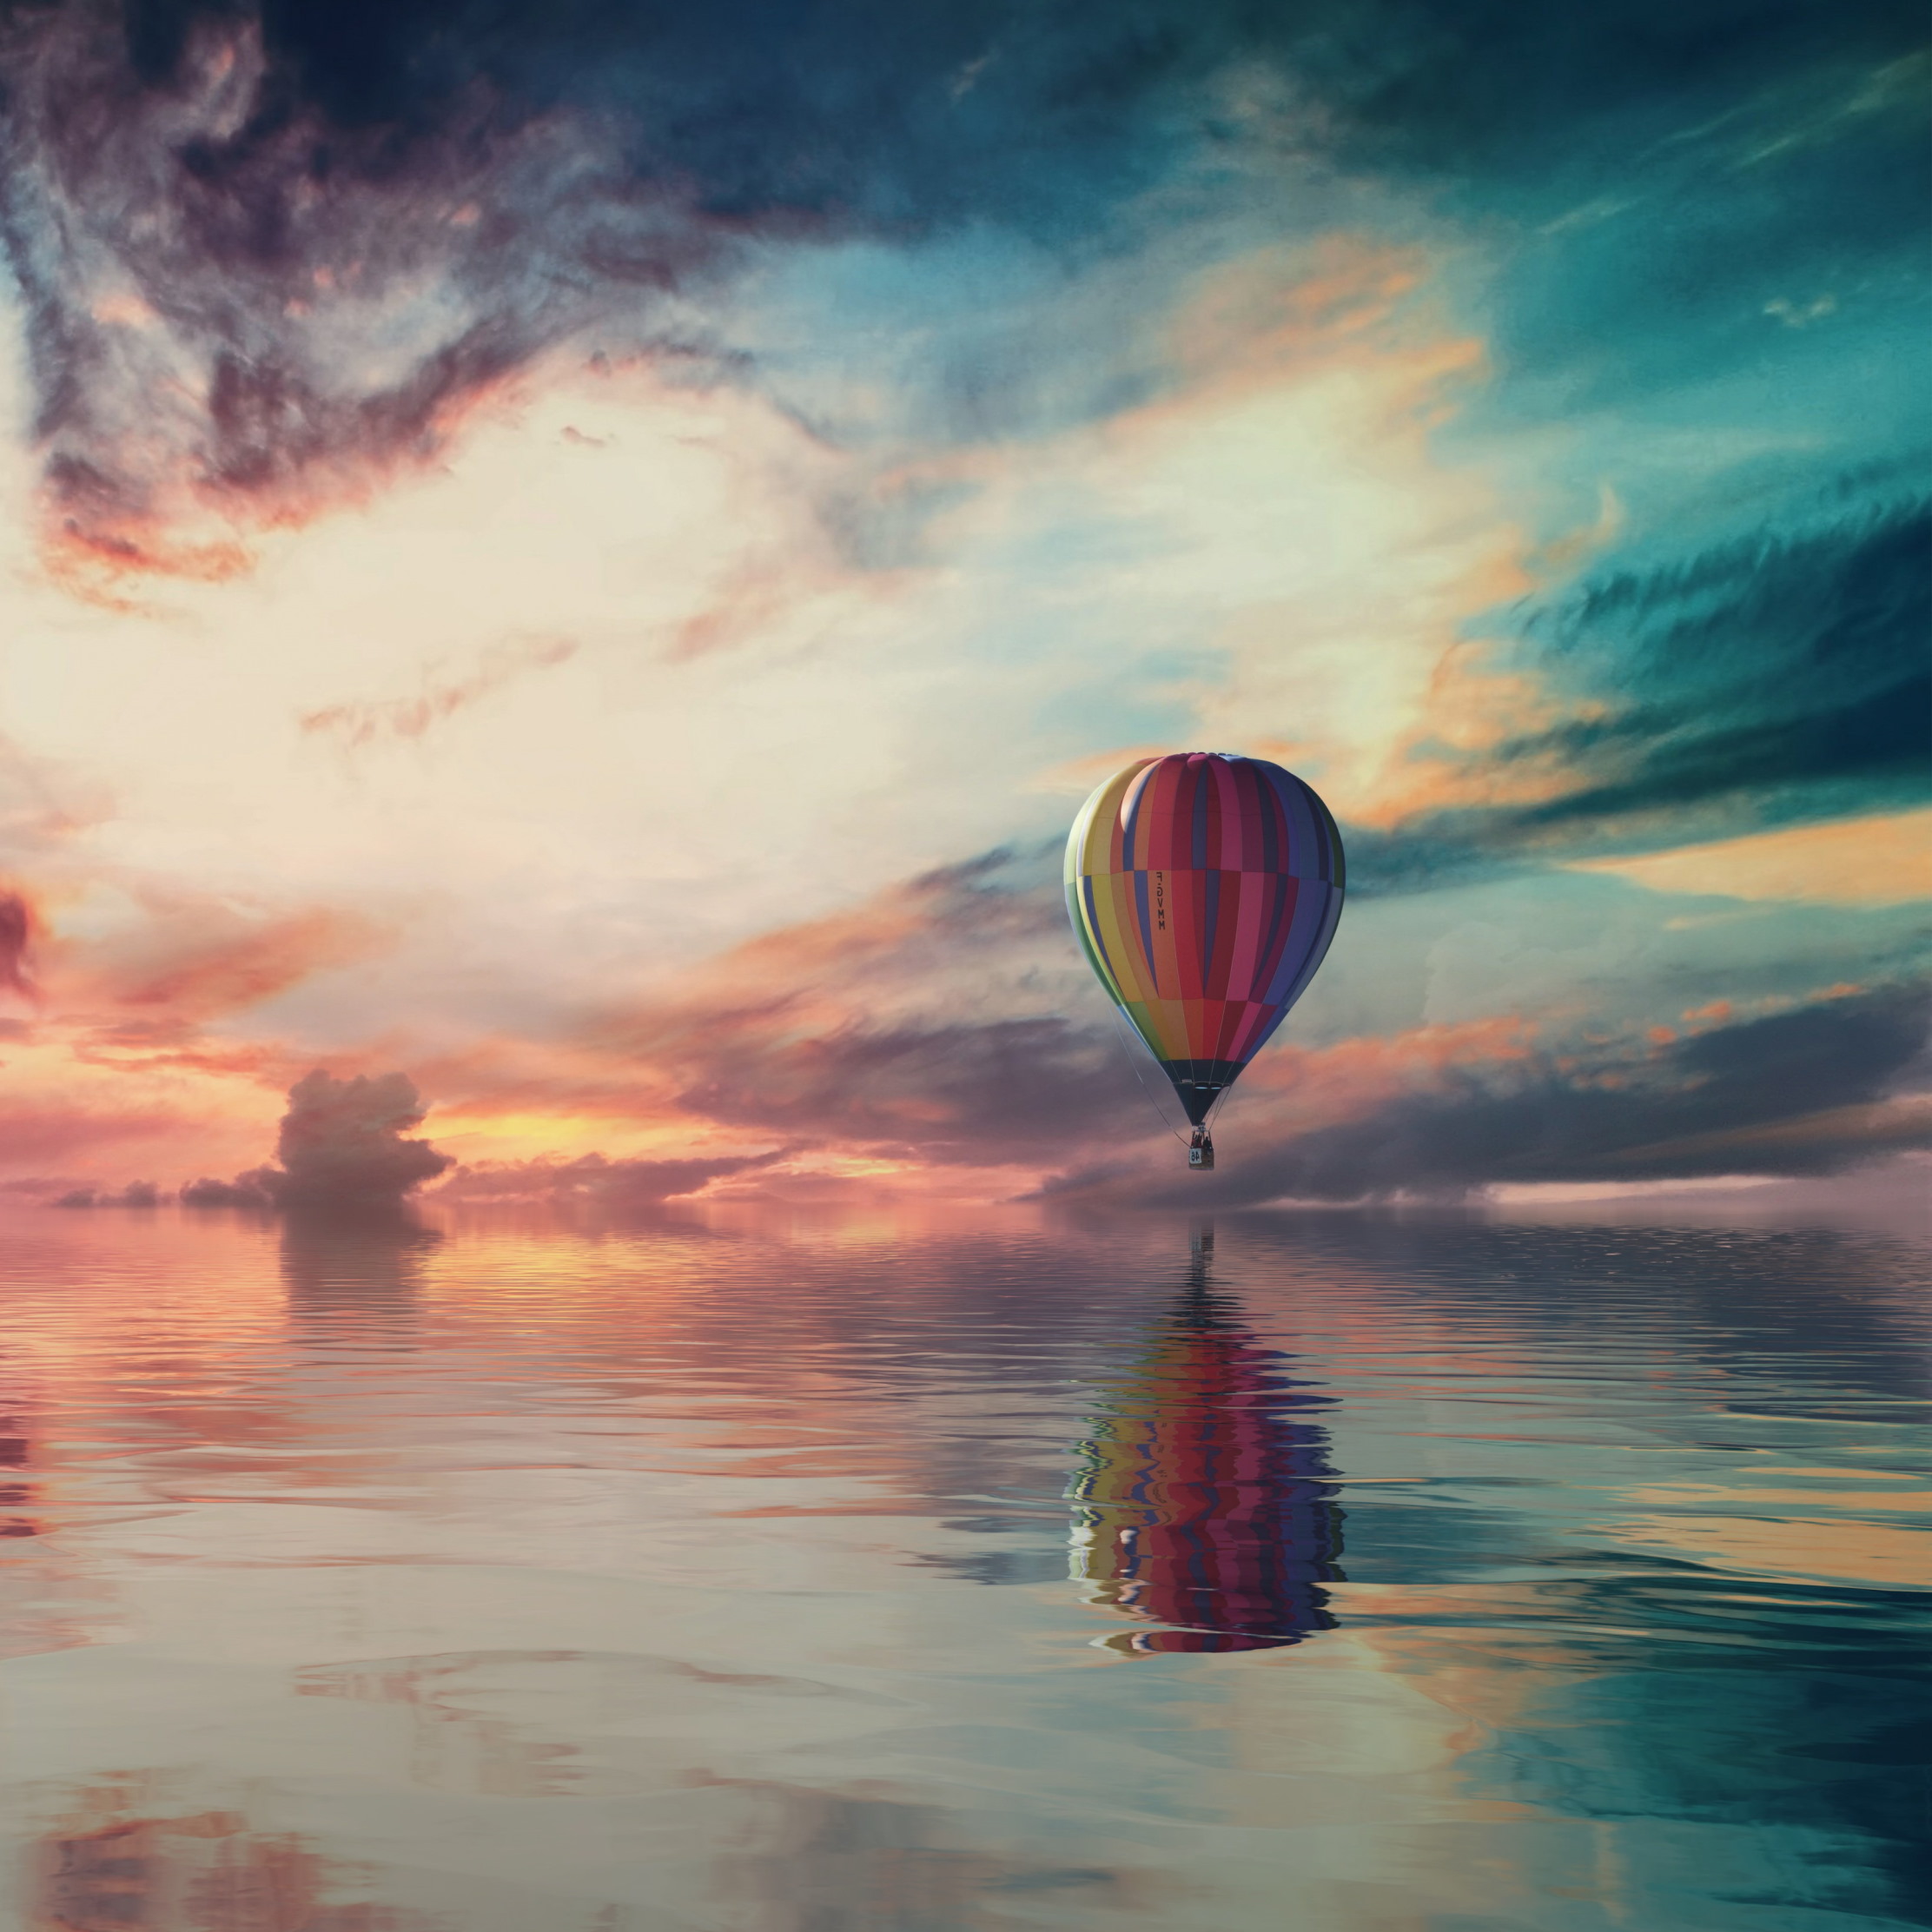 Fantasy travel with the hot air balloon wallpaper 2224x2224